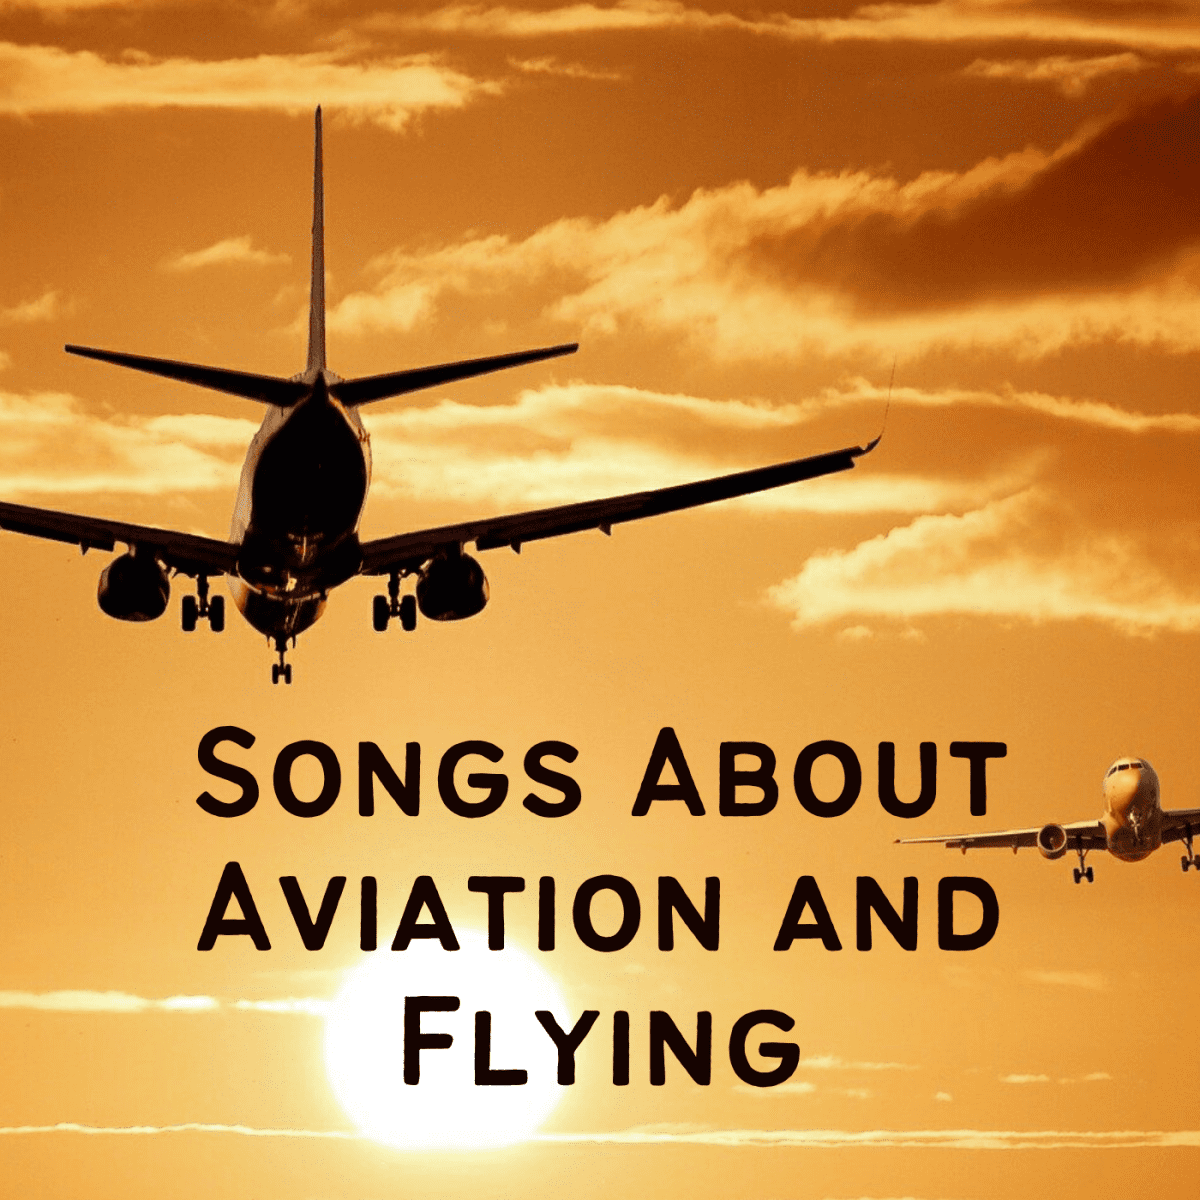 71 Songs About Aviation and Flying - Spinditty